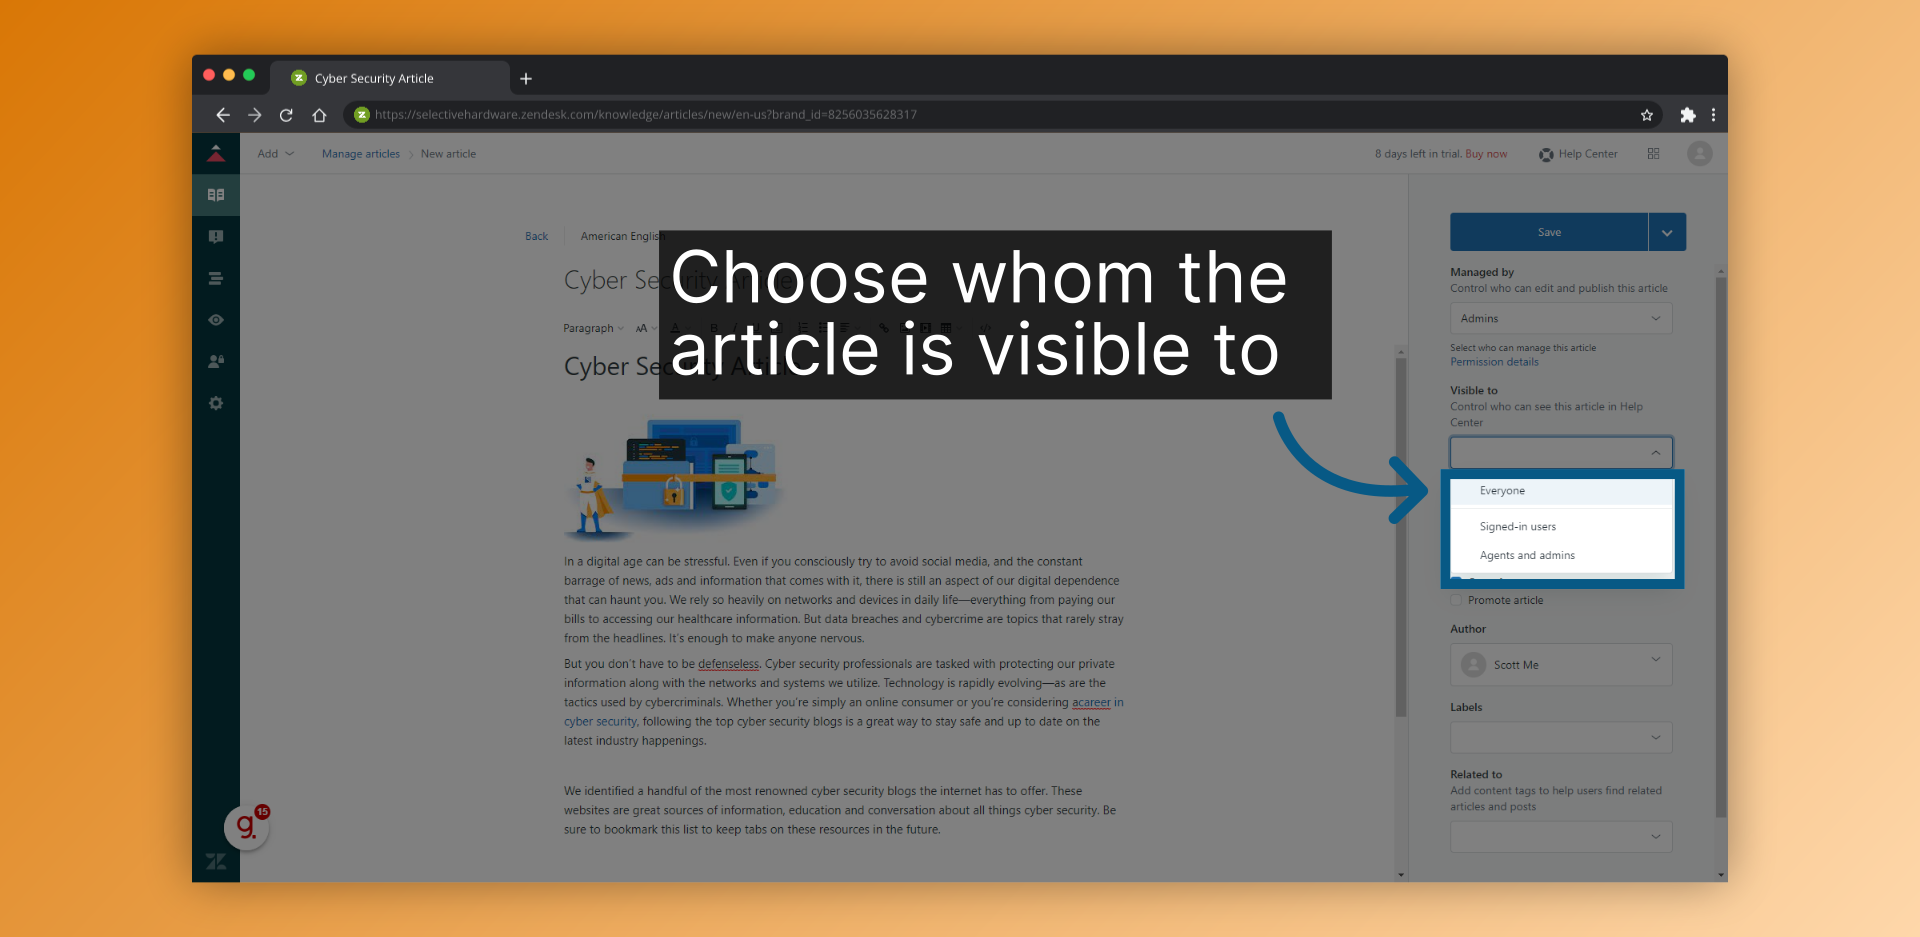 Choose whom the article is visible to